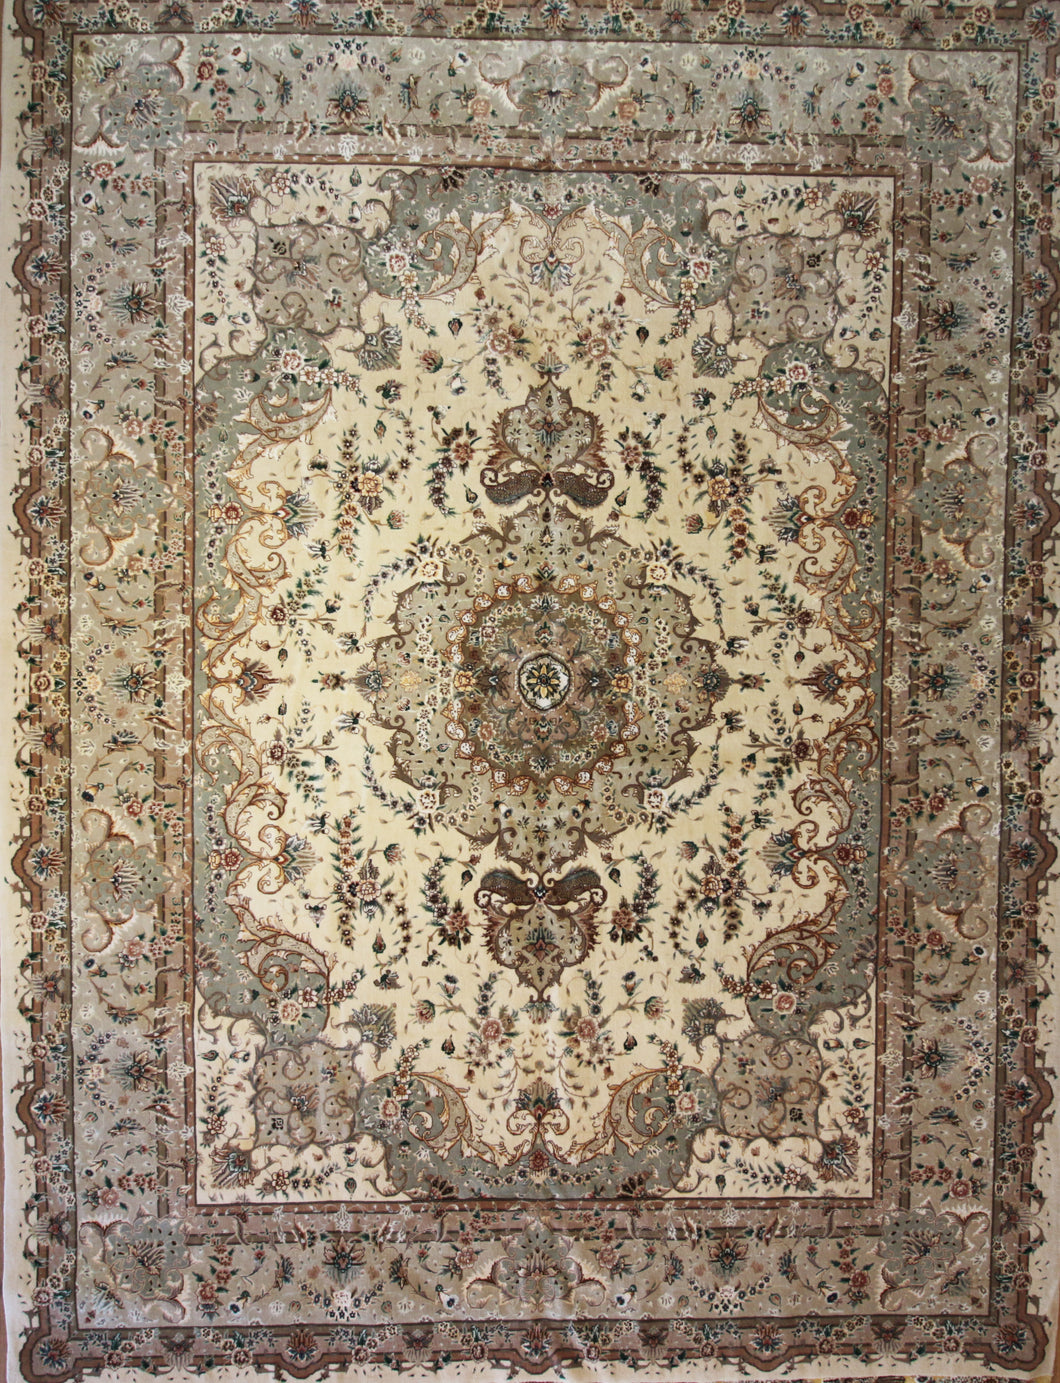 Floral Tabriz Persian Area Rug 9x12 One of a Kind